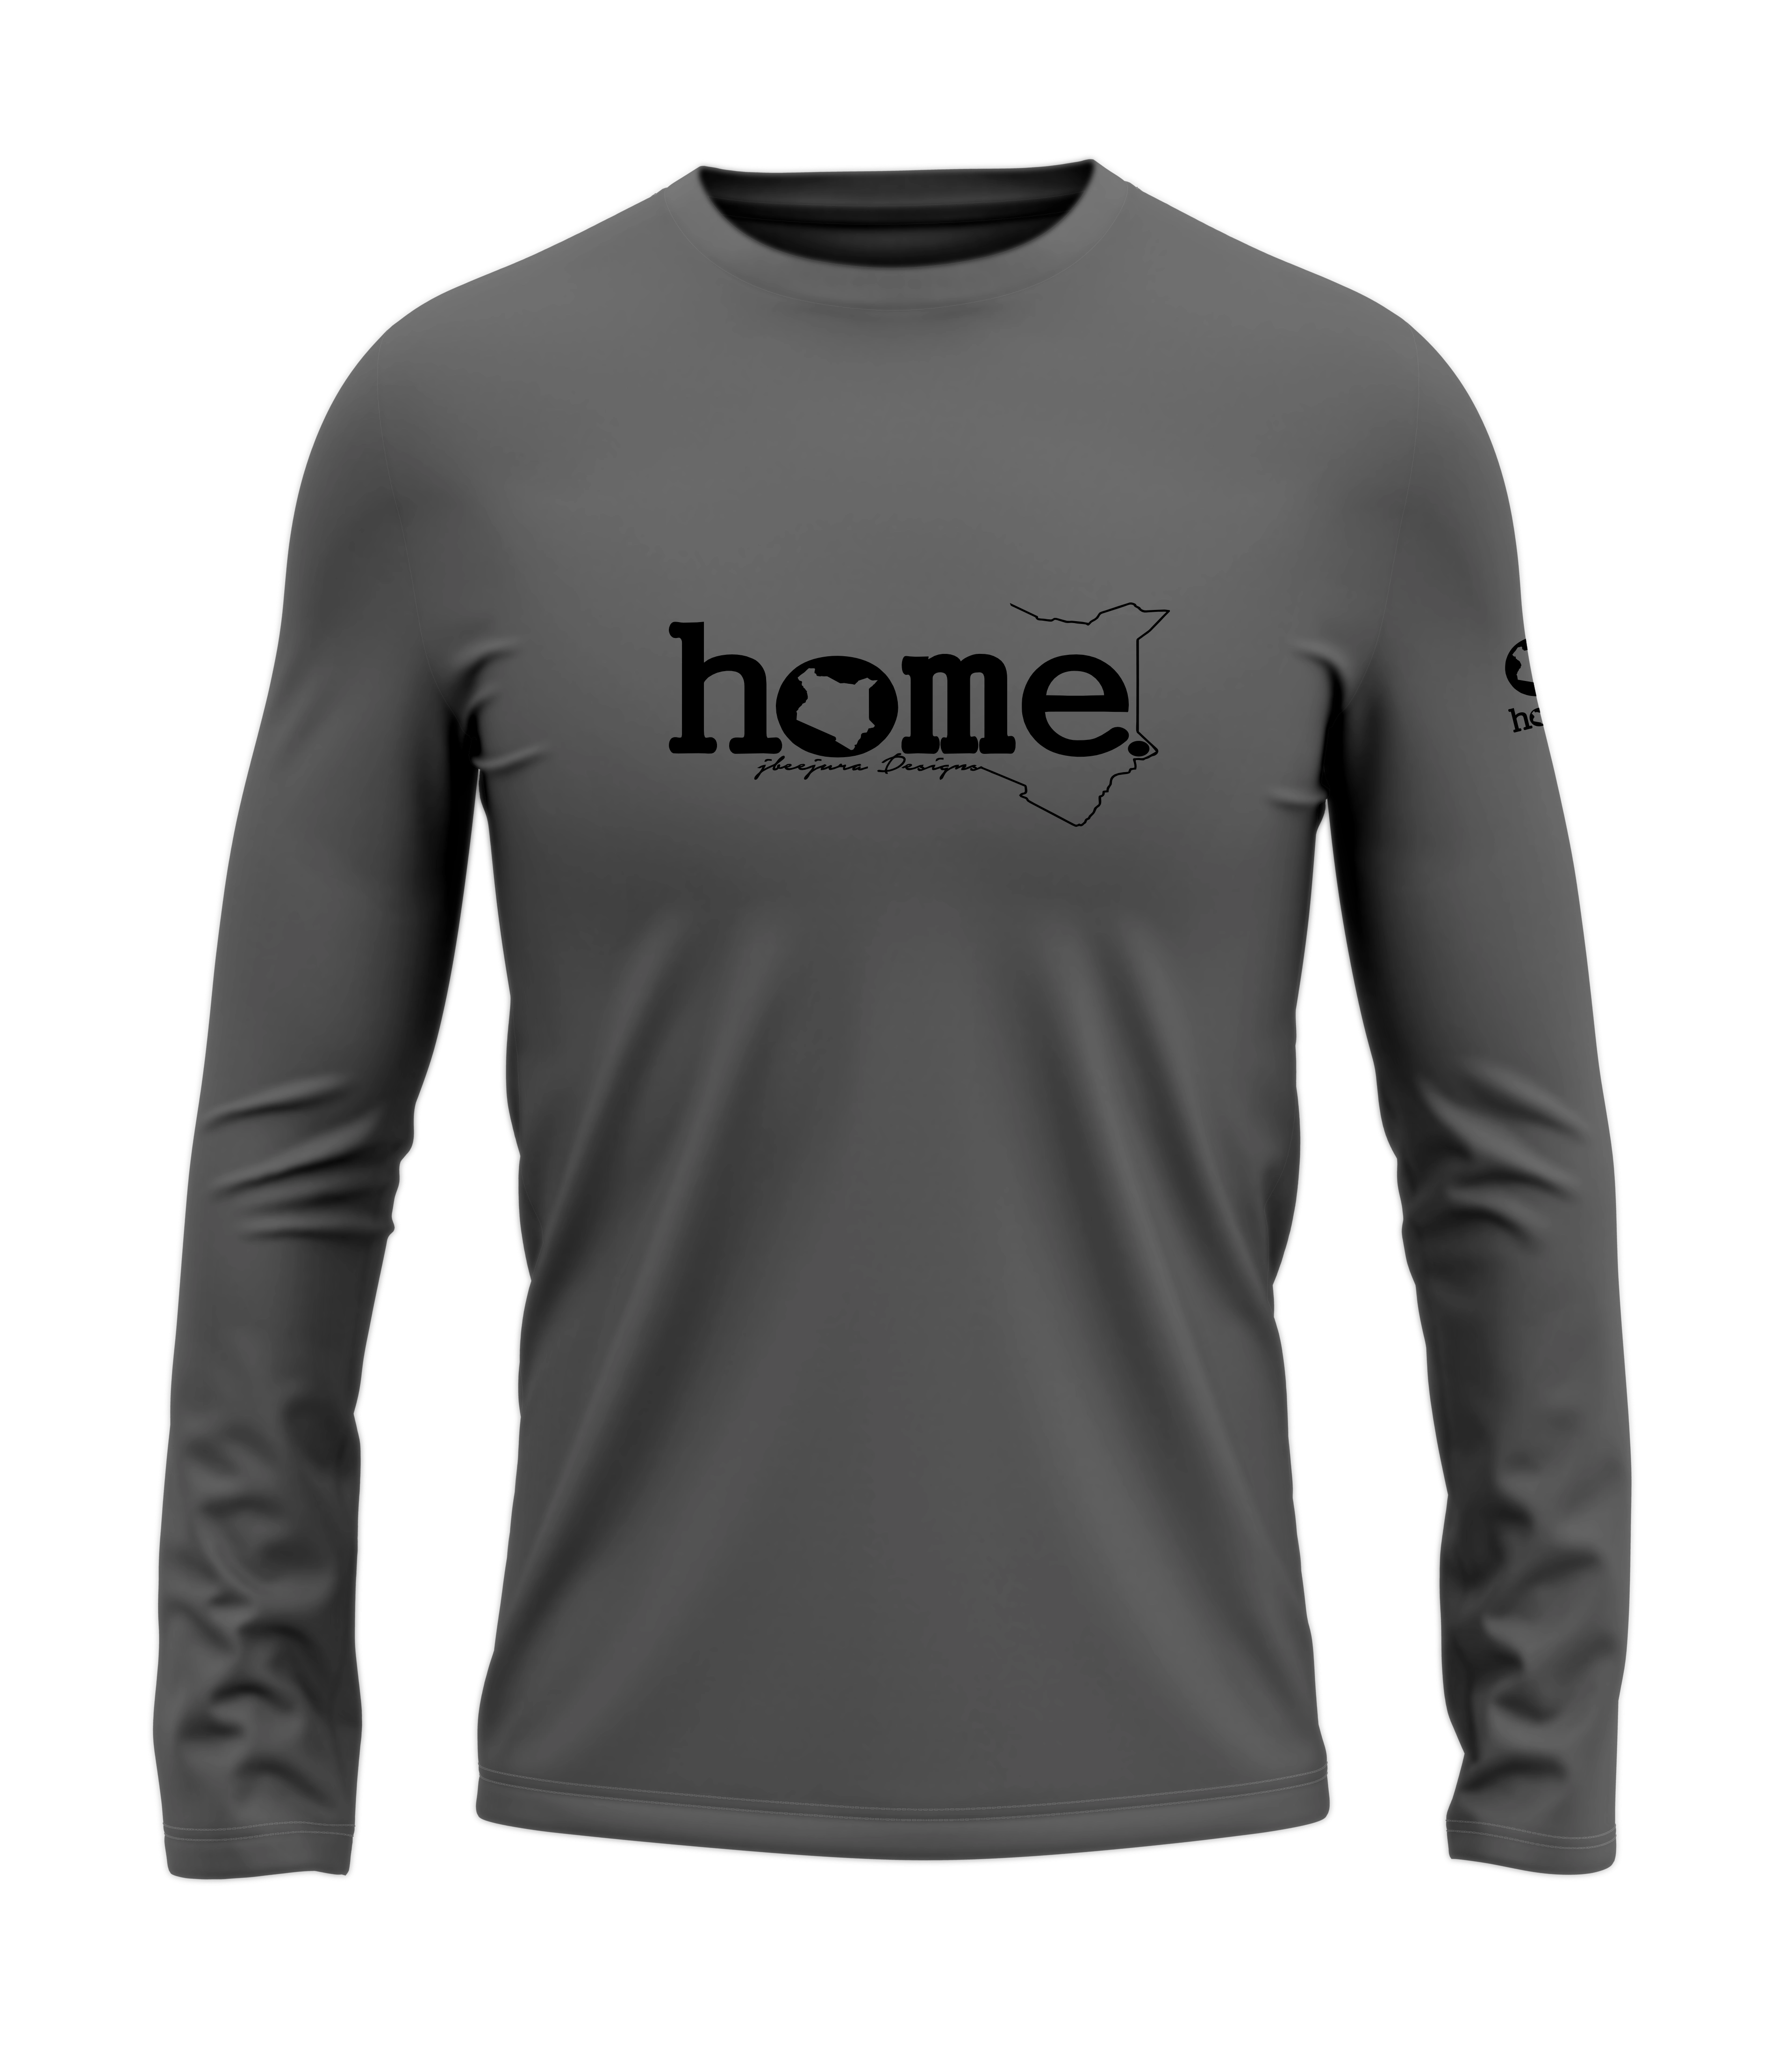 home_254 LONG-SLEEVED SAGE T-SHIRT WITH A BLACK CLASSIC WORDS PRINT – COTTON PLUS FABRIC